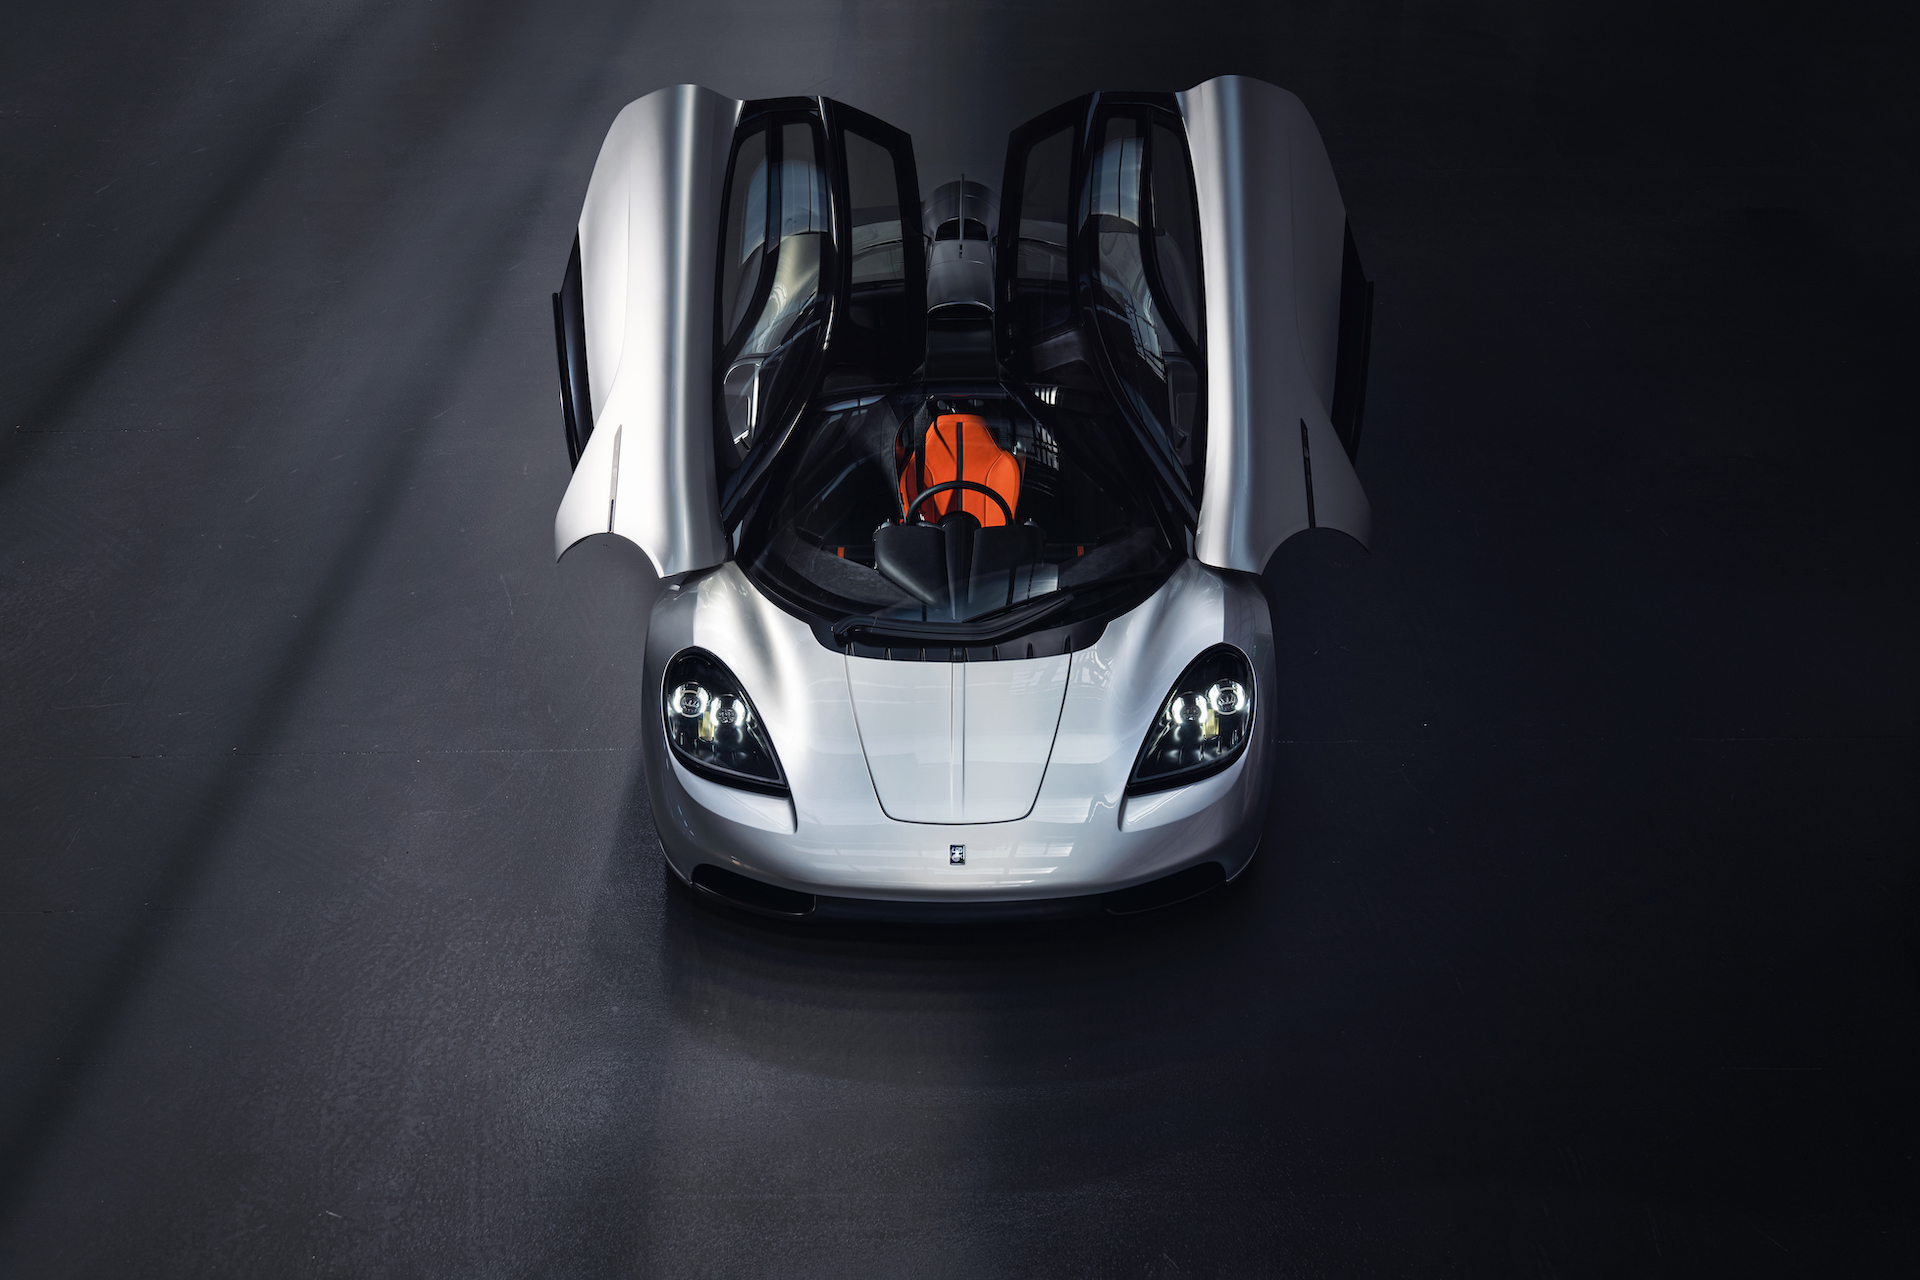 T50 from Gordon Murray Automotive- The reincarnation of the McLaren F1, revealed